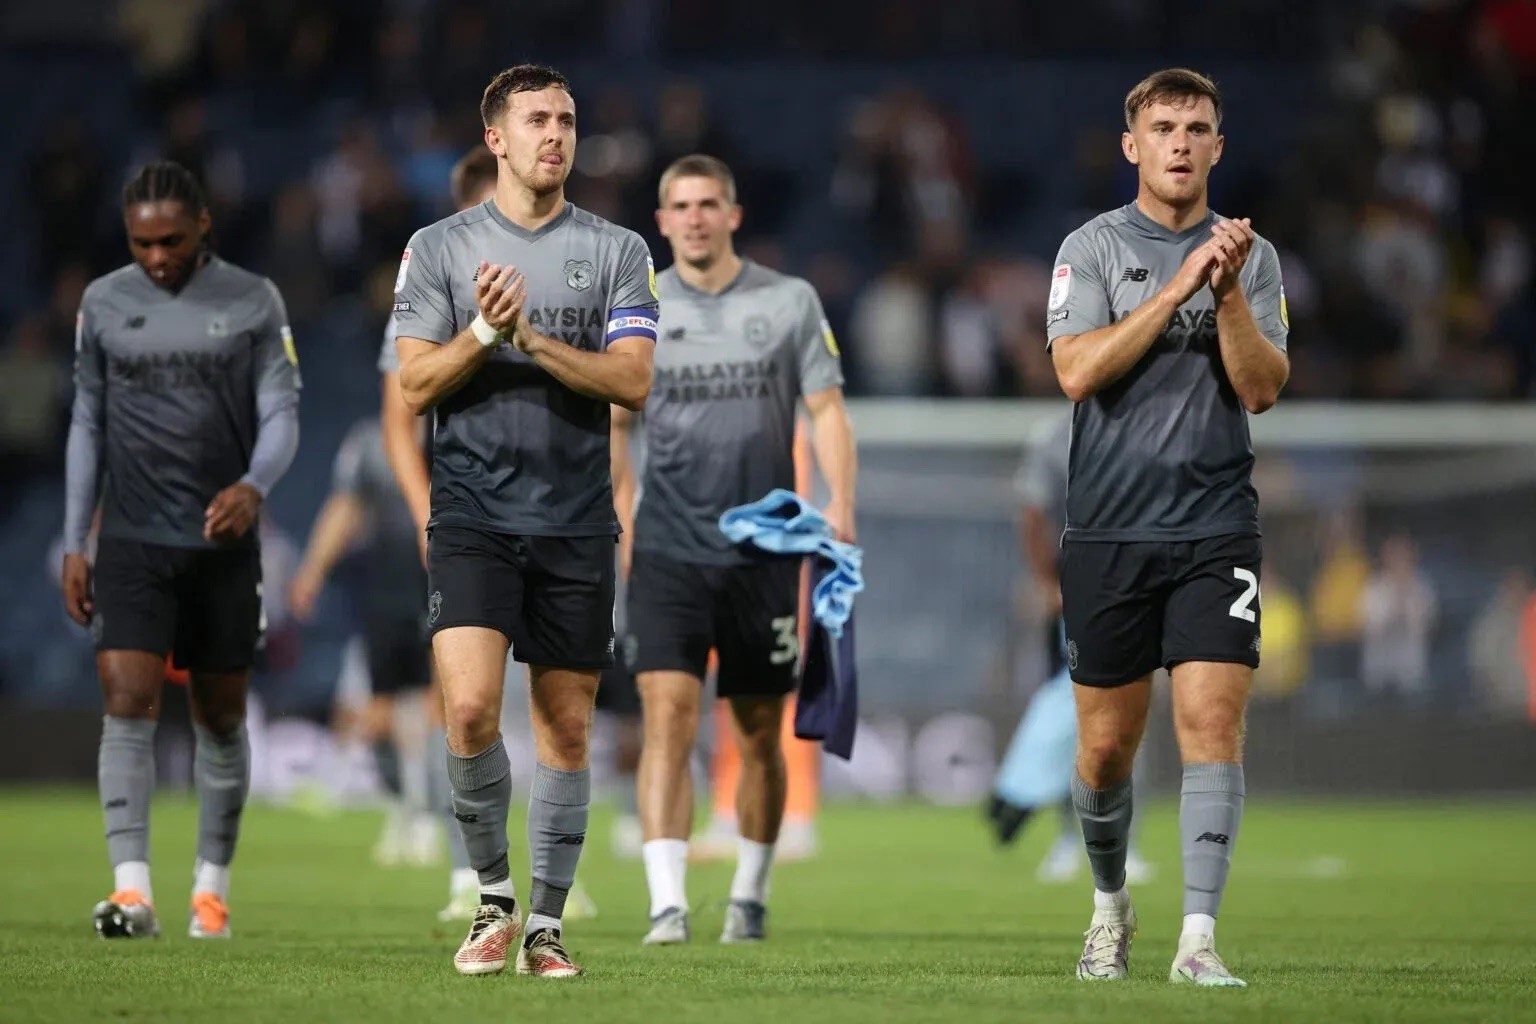 Appraising Cardiff’s squad – The table doesn’t lie, but it doesn’t always tell the full story